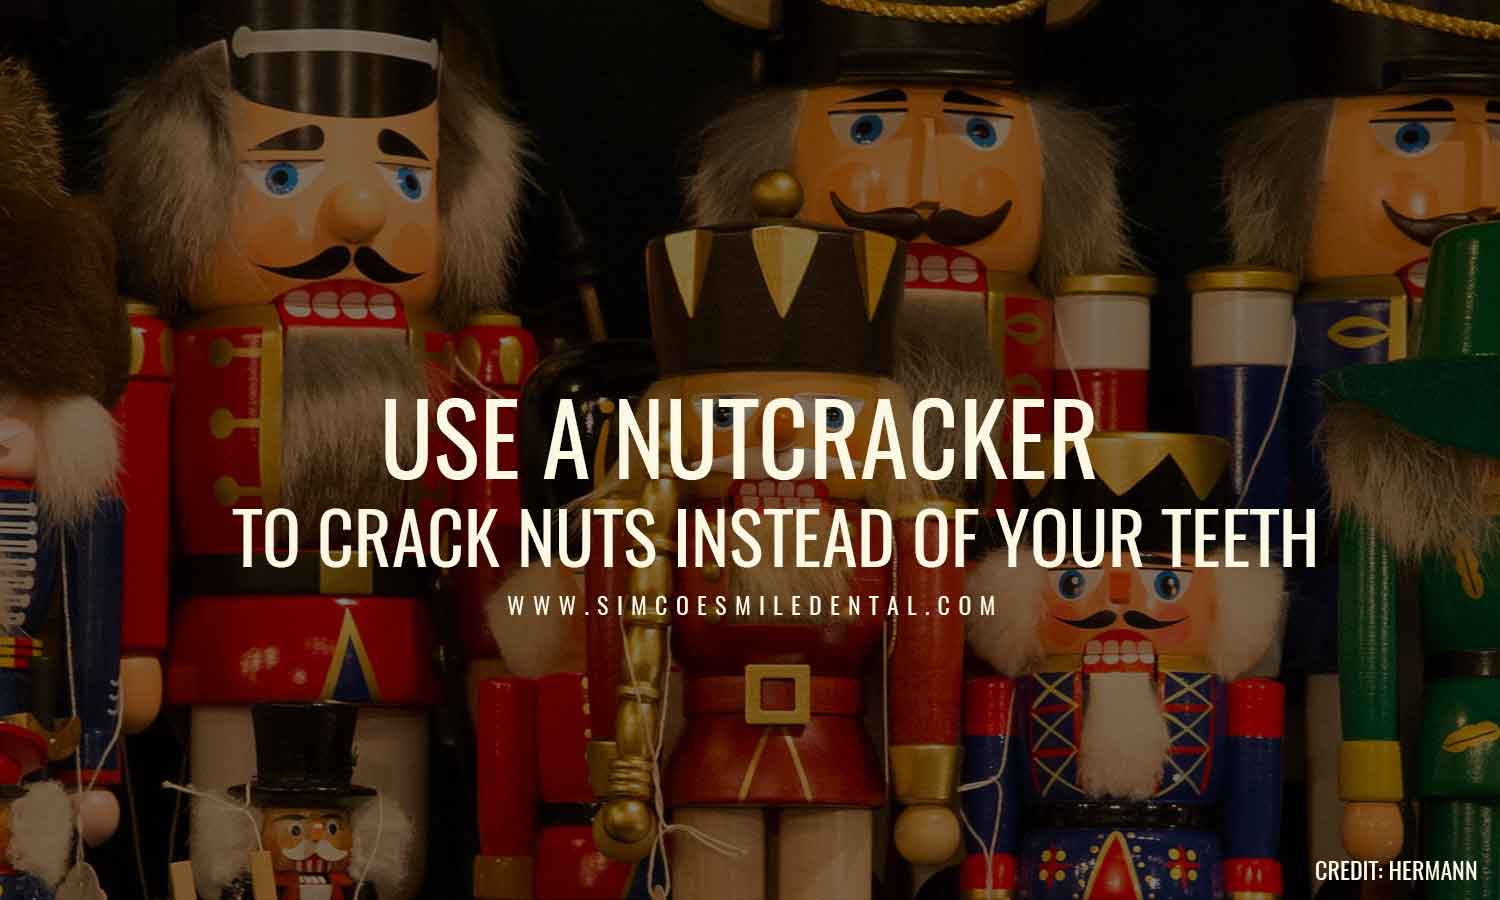 Use a nutcracker to crack nuts instead of your teeth